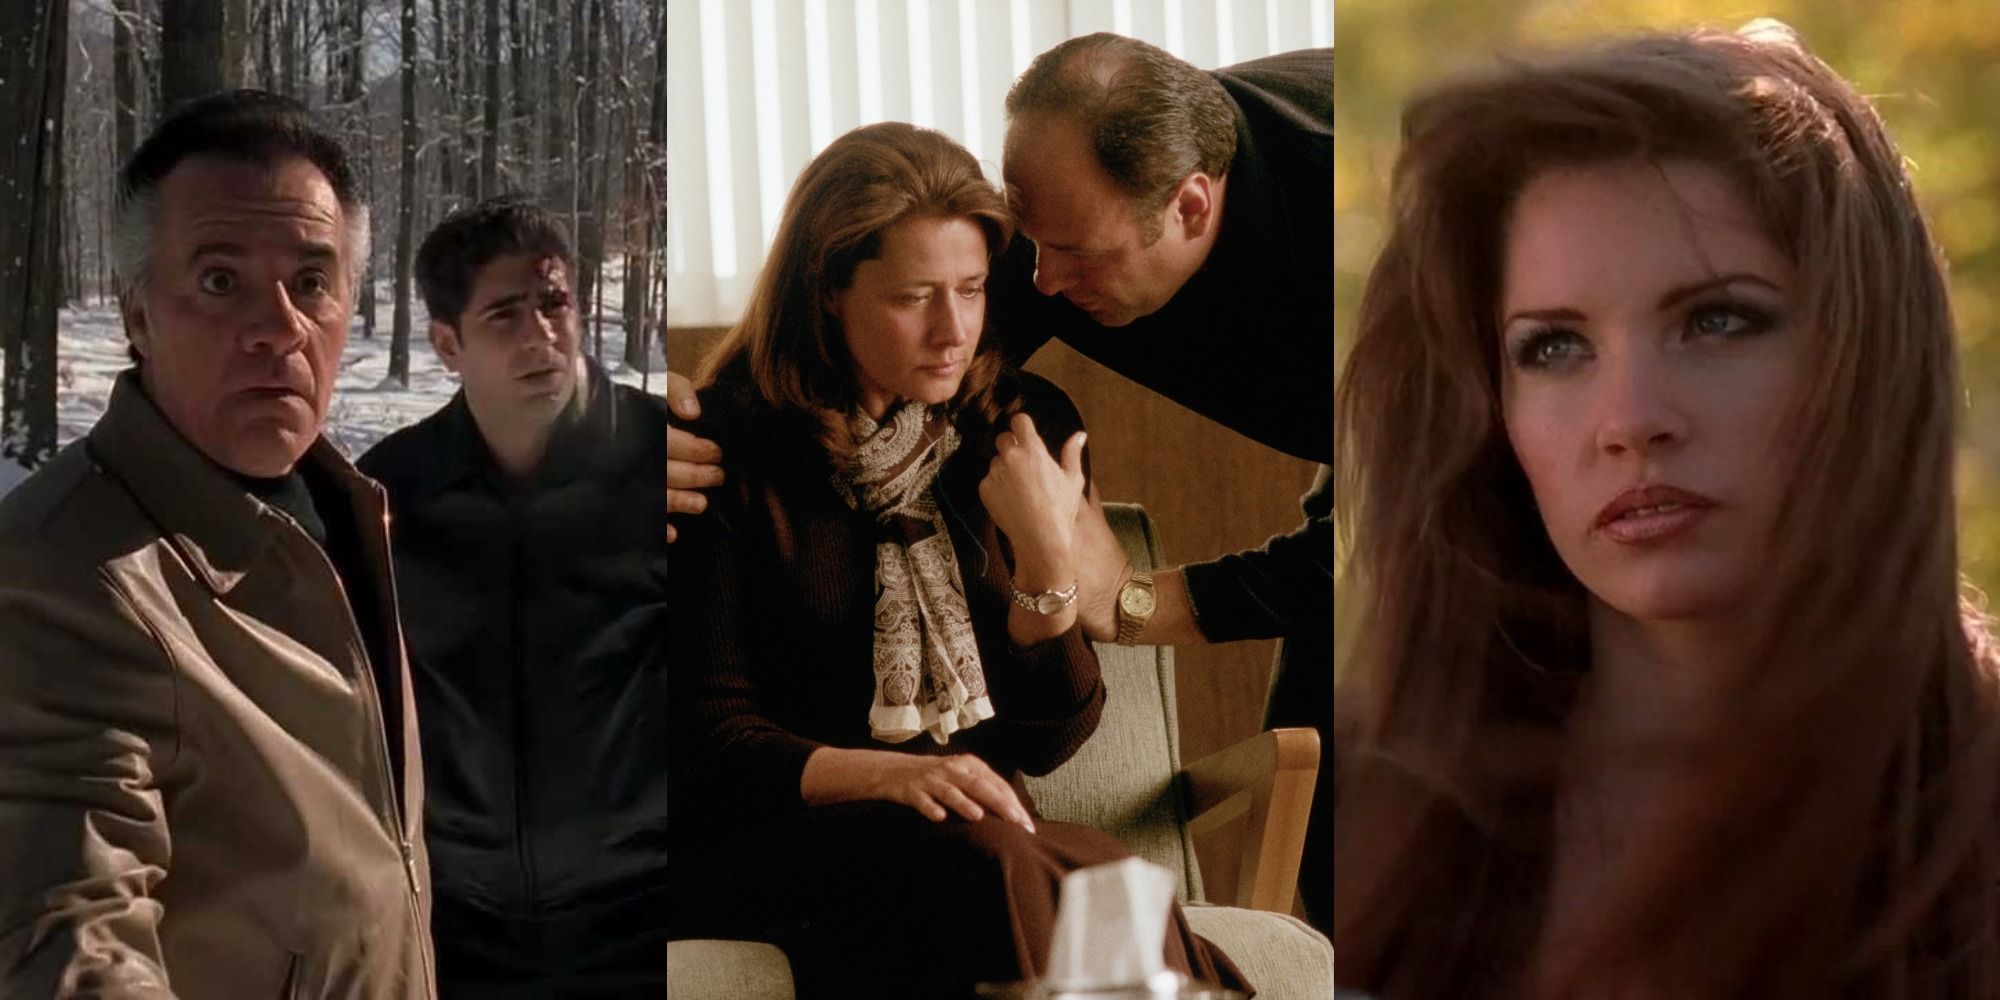 The Sopranos Every Season Of The Show Ranked From Worst To Best